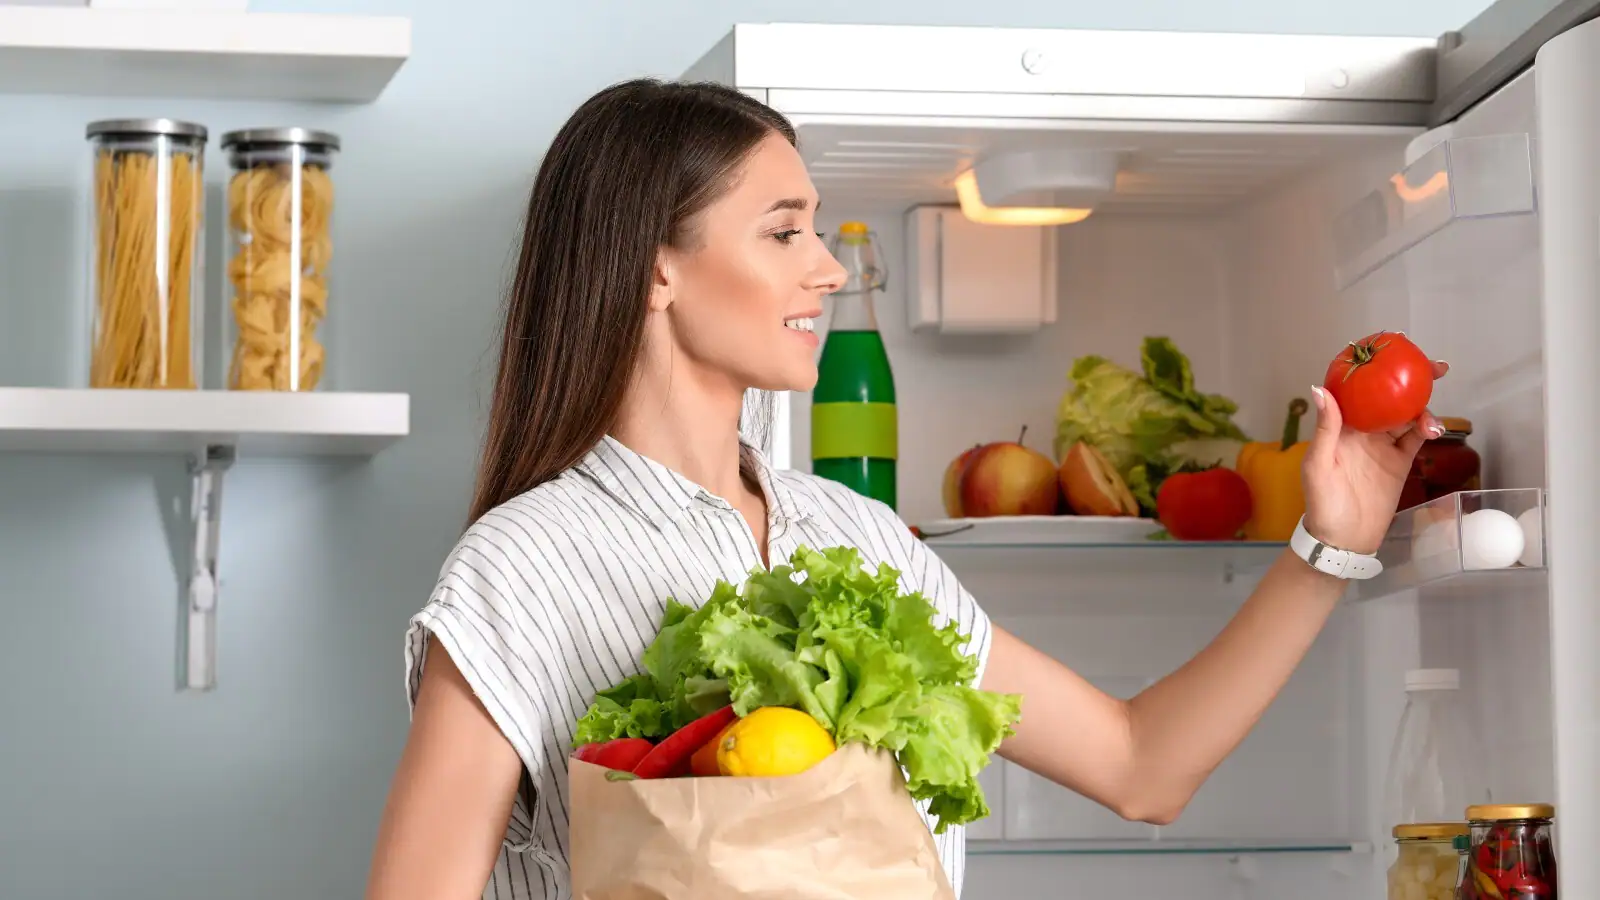 "Foods That Should Never Be Placed in the Refrigerator"